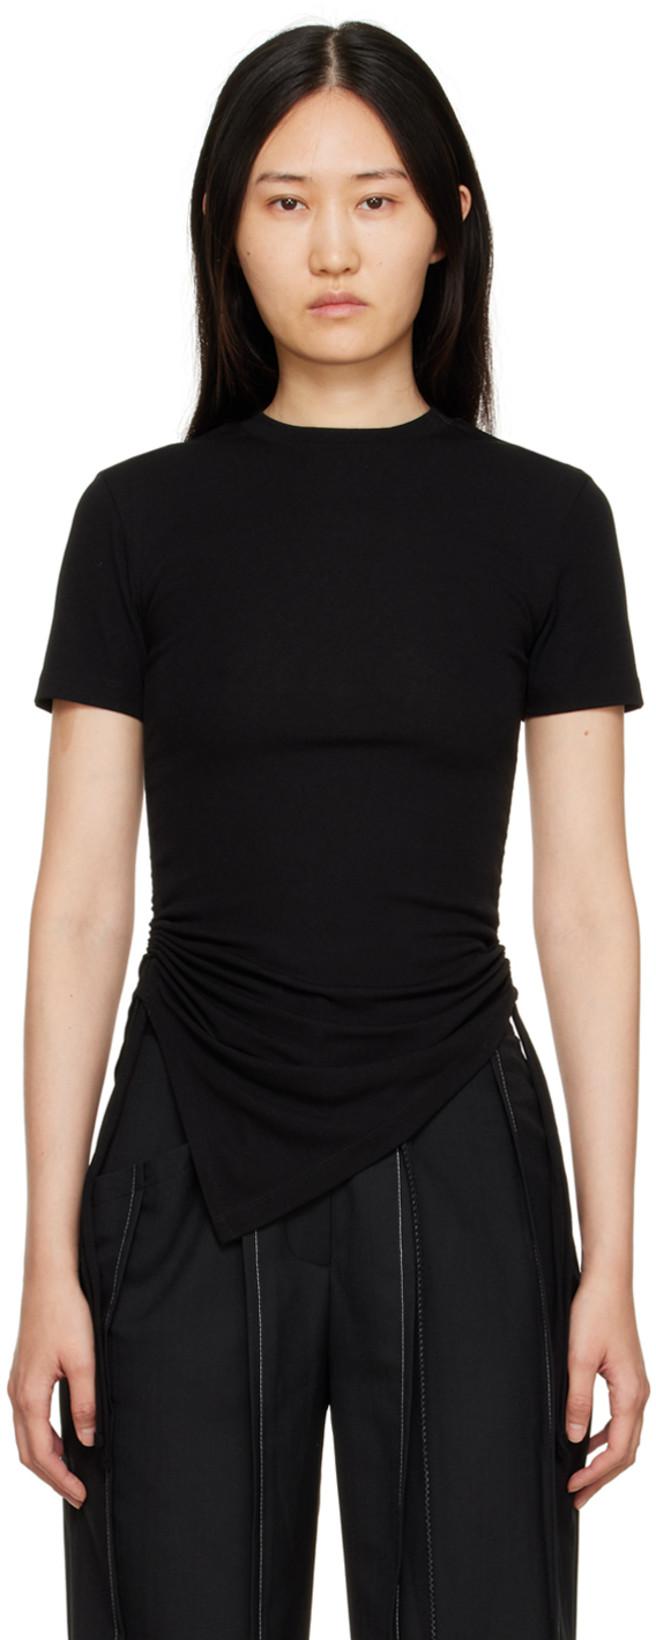 SSENSE Exclusive Black Cindy T-Shirt by ANDERSSON BELL